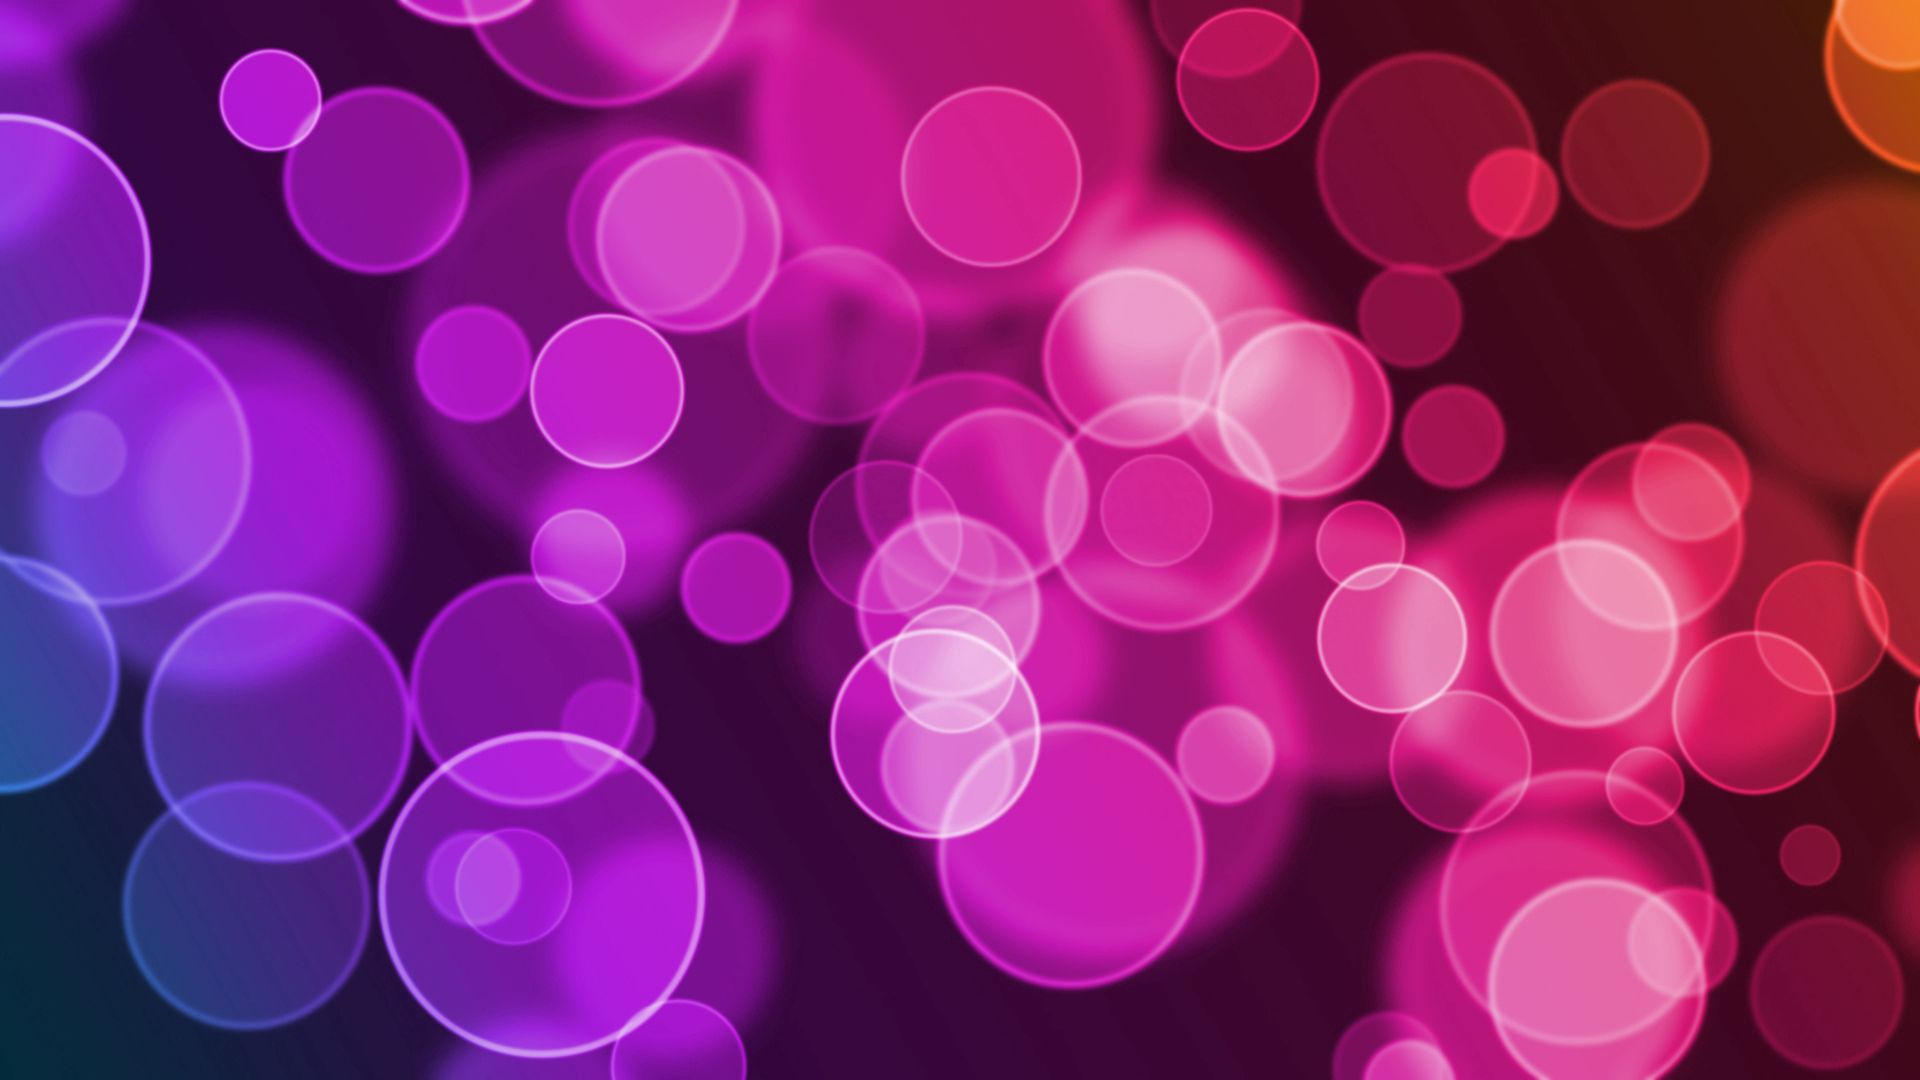 Cool HD Wallpaper bright, circles, multicolored, abstract